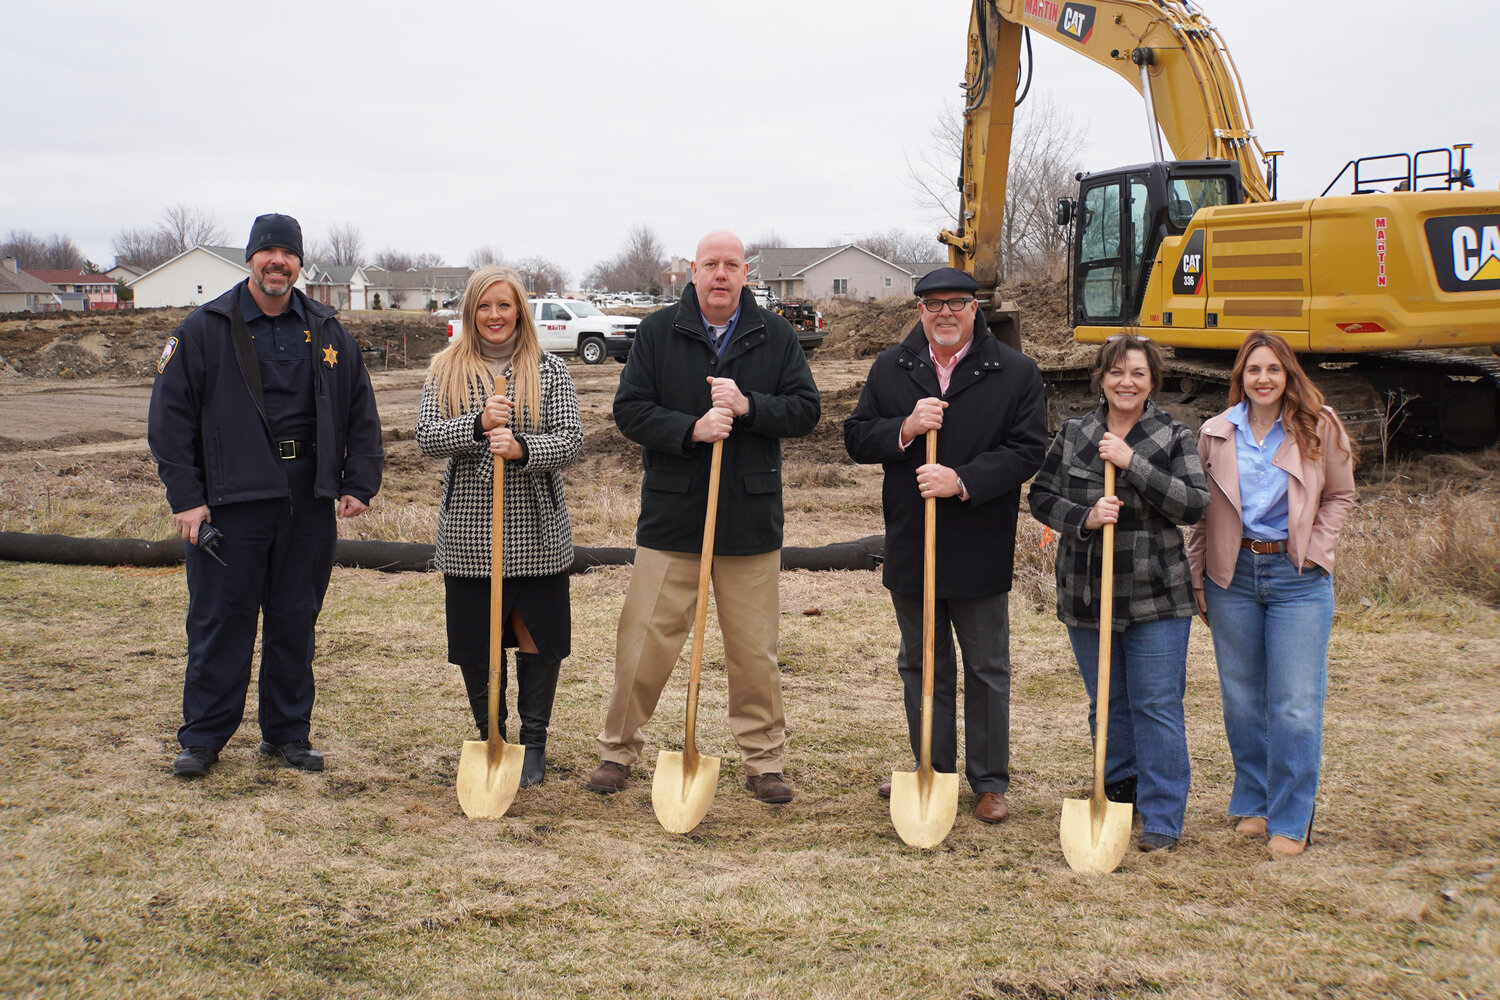 On Friday, Feb. 2, a groundbreaking ceremony was held by the City of Rochelle and New Directions Housing Corporation at 405 Lake Lida Lane in Rochelle for The Grove, a new family housing complex. 